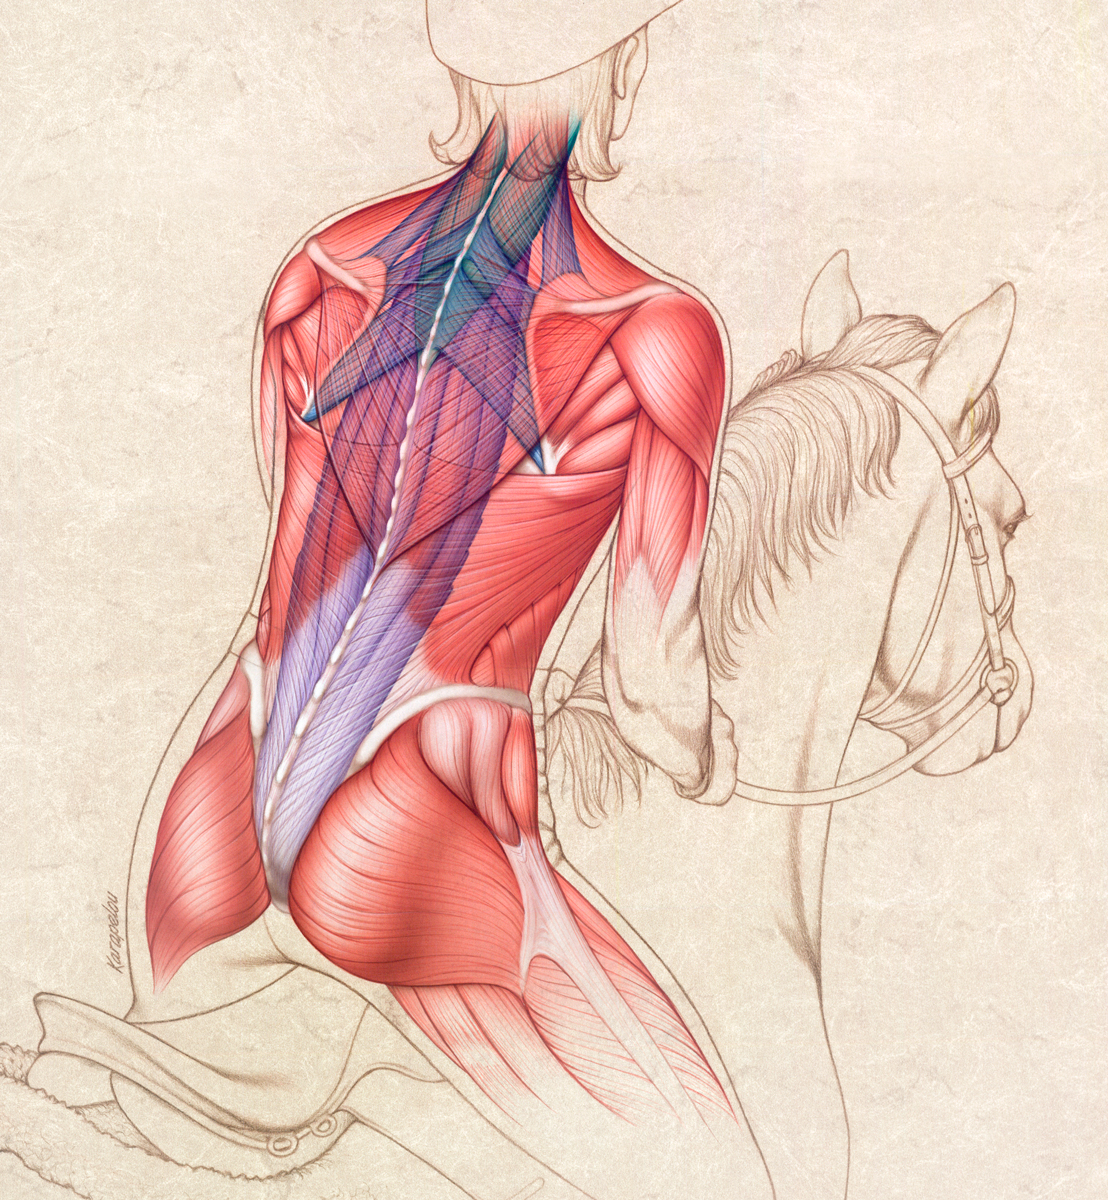 horses anatomy the one supporting the thought that lowering of the neck str...